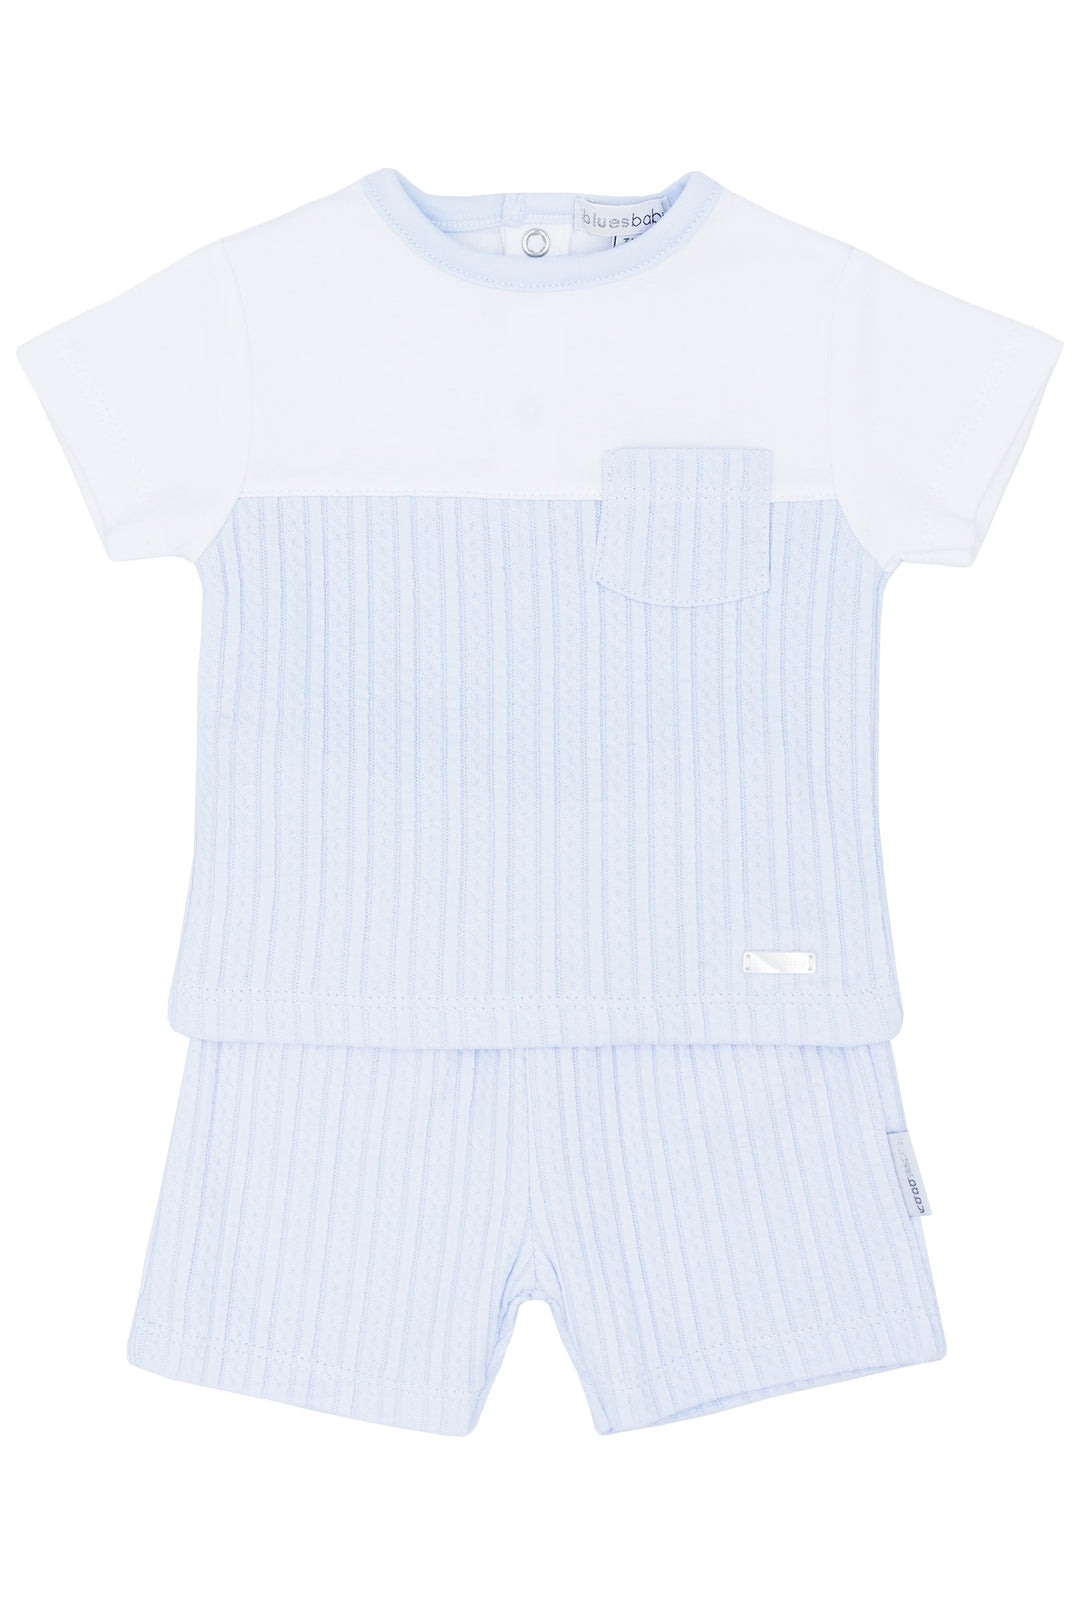 Blues Baby PREORDER "Calvin" Baby Blue Cable Knit T-Shirt & Shorts | Millie and John